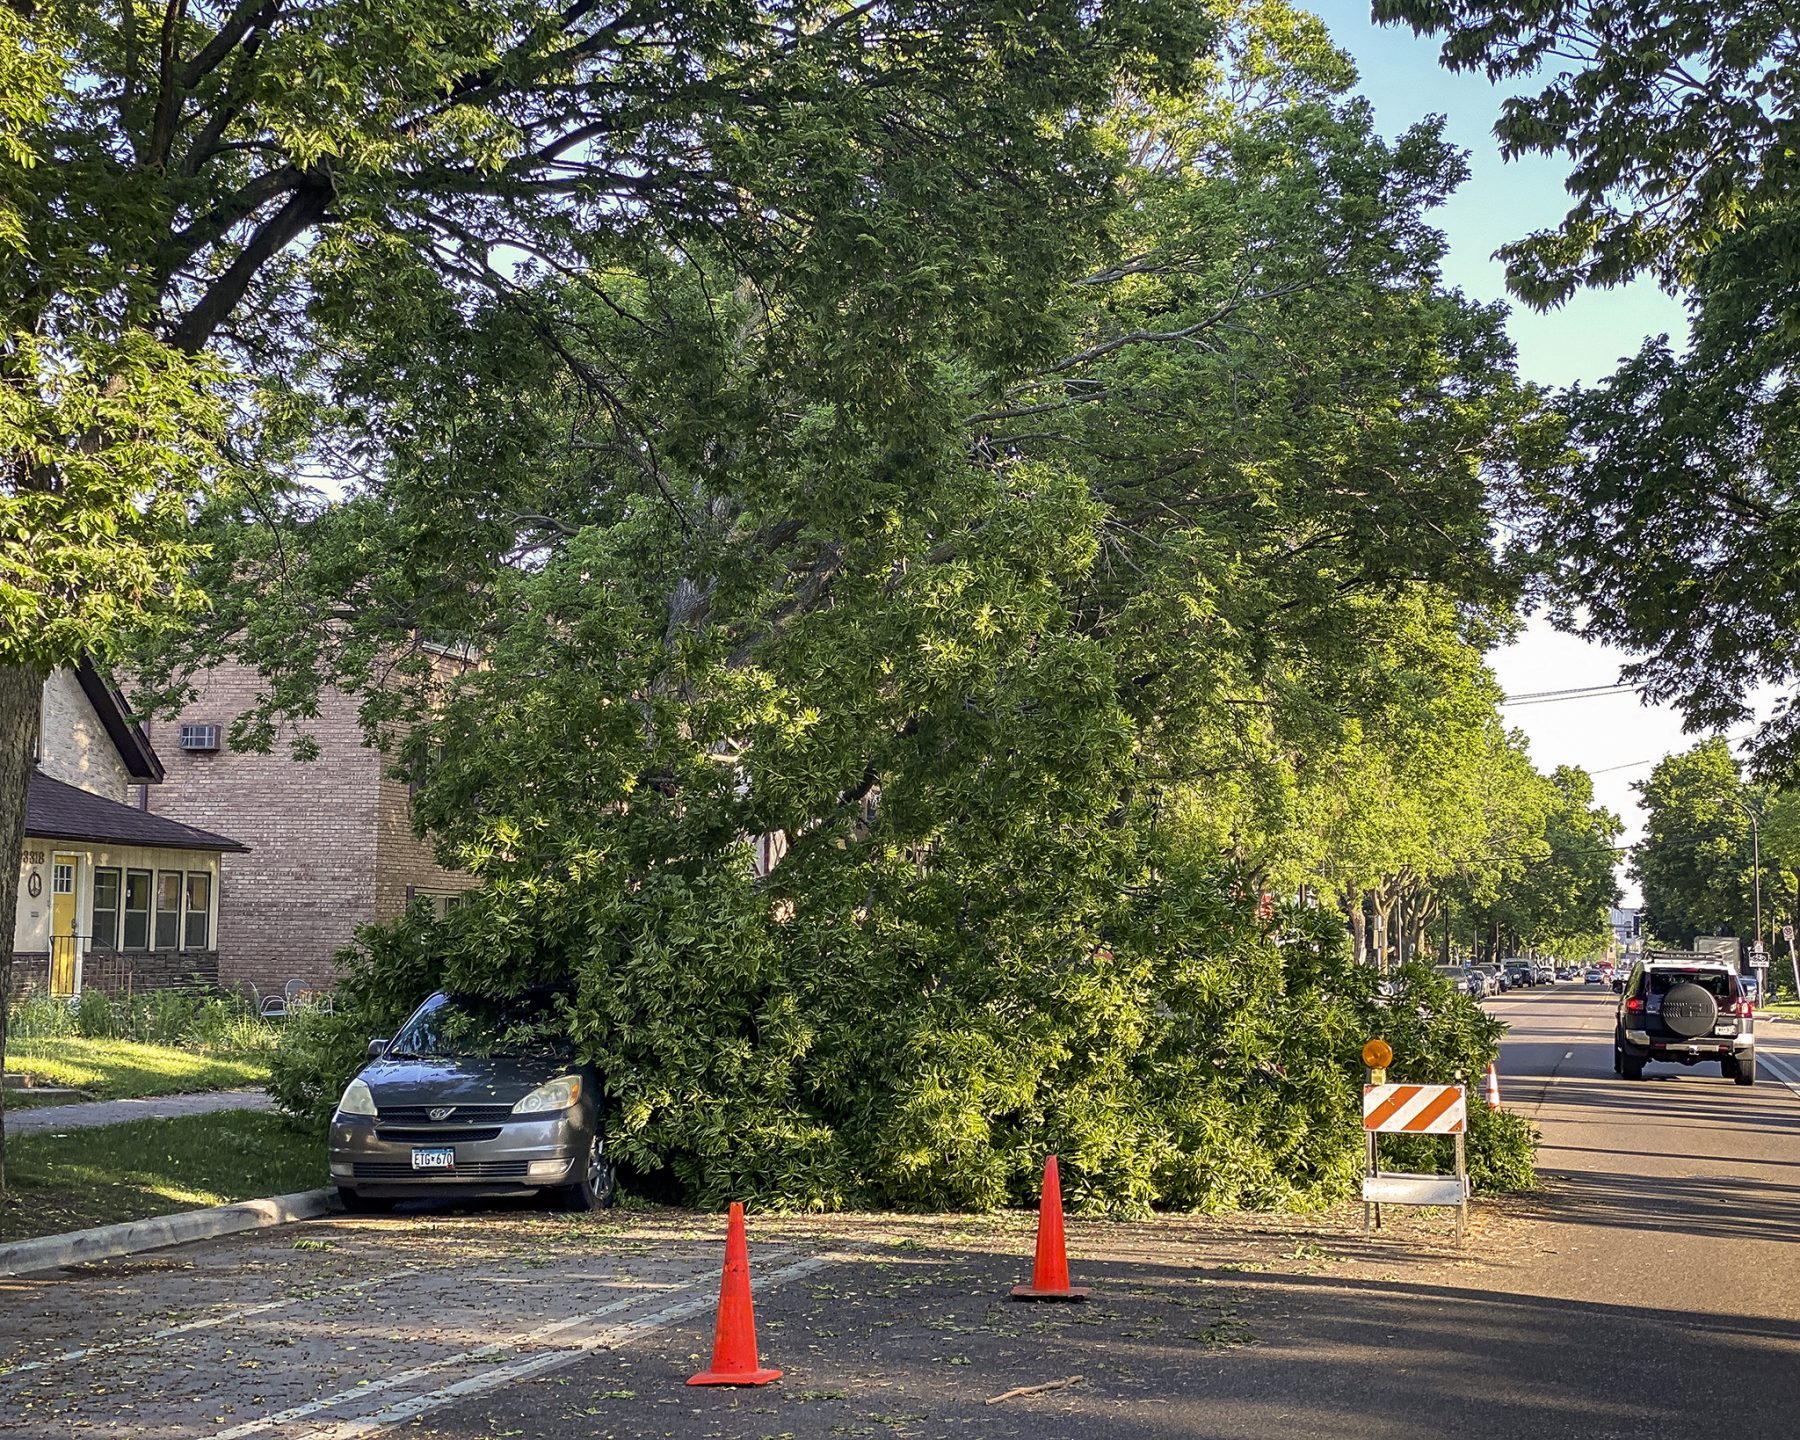 A large tree fell onto Minnehaha Ave, on top of an unfortunate car.